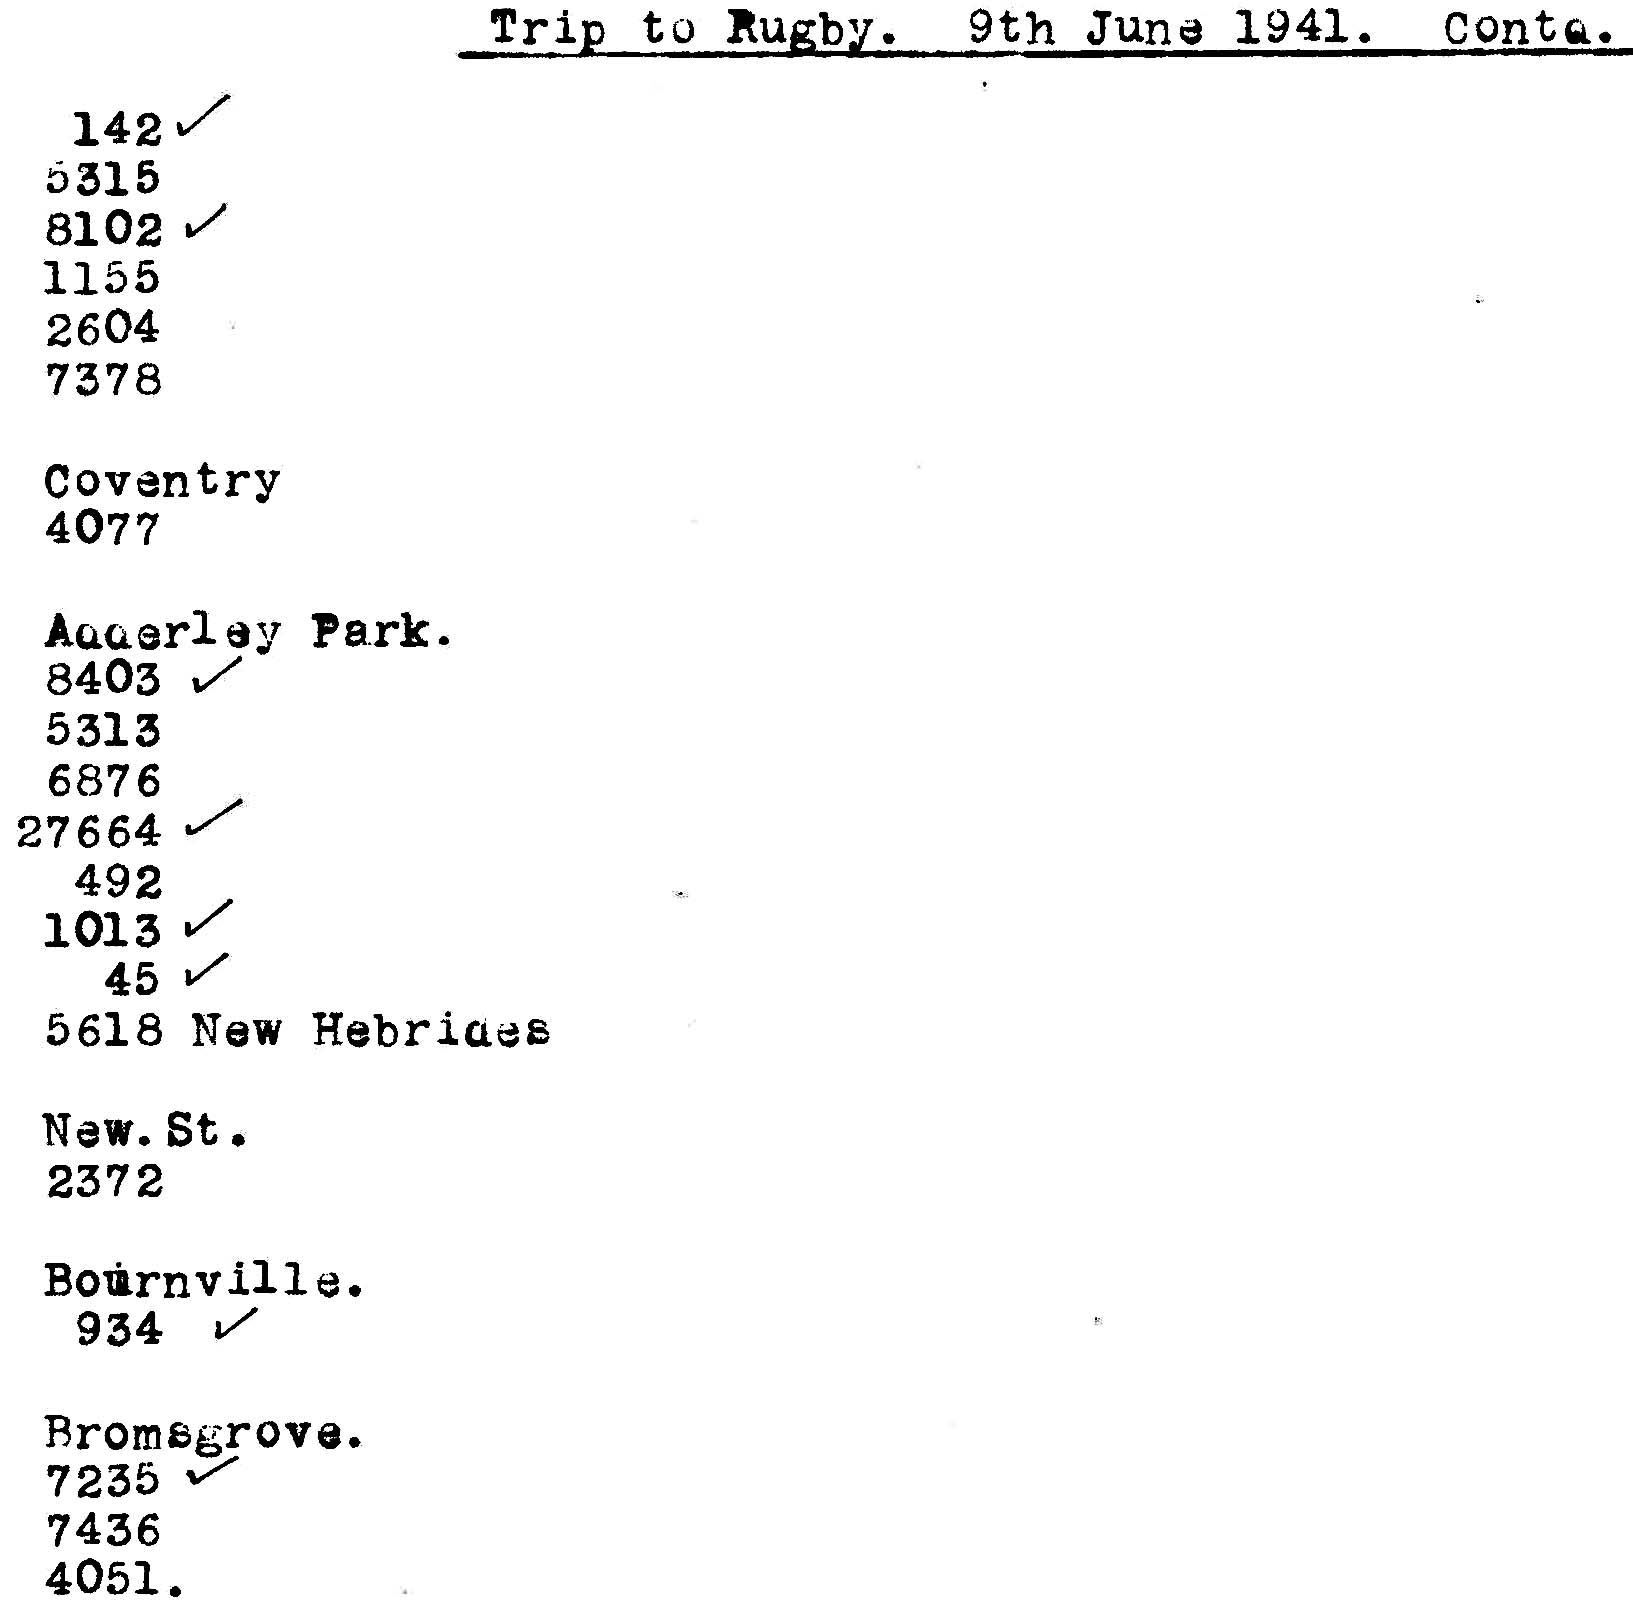 9th June 1941 - Trip to Rugby.